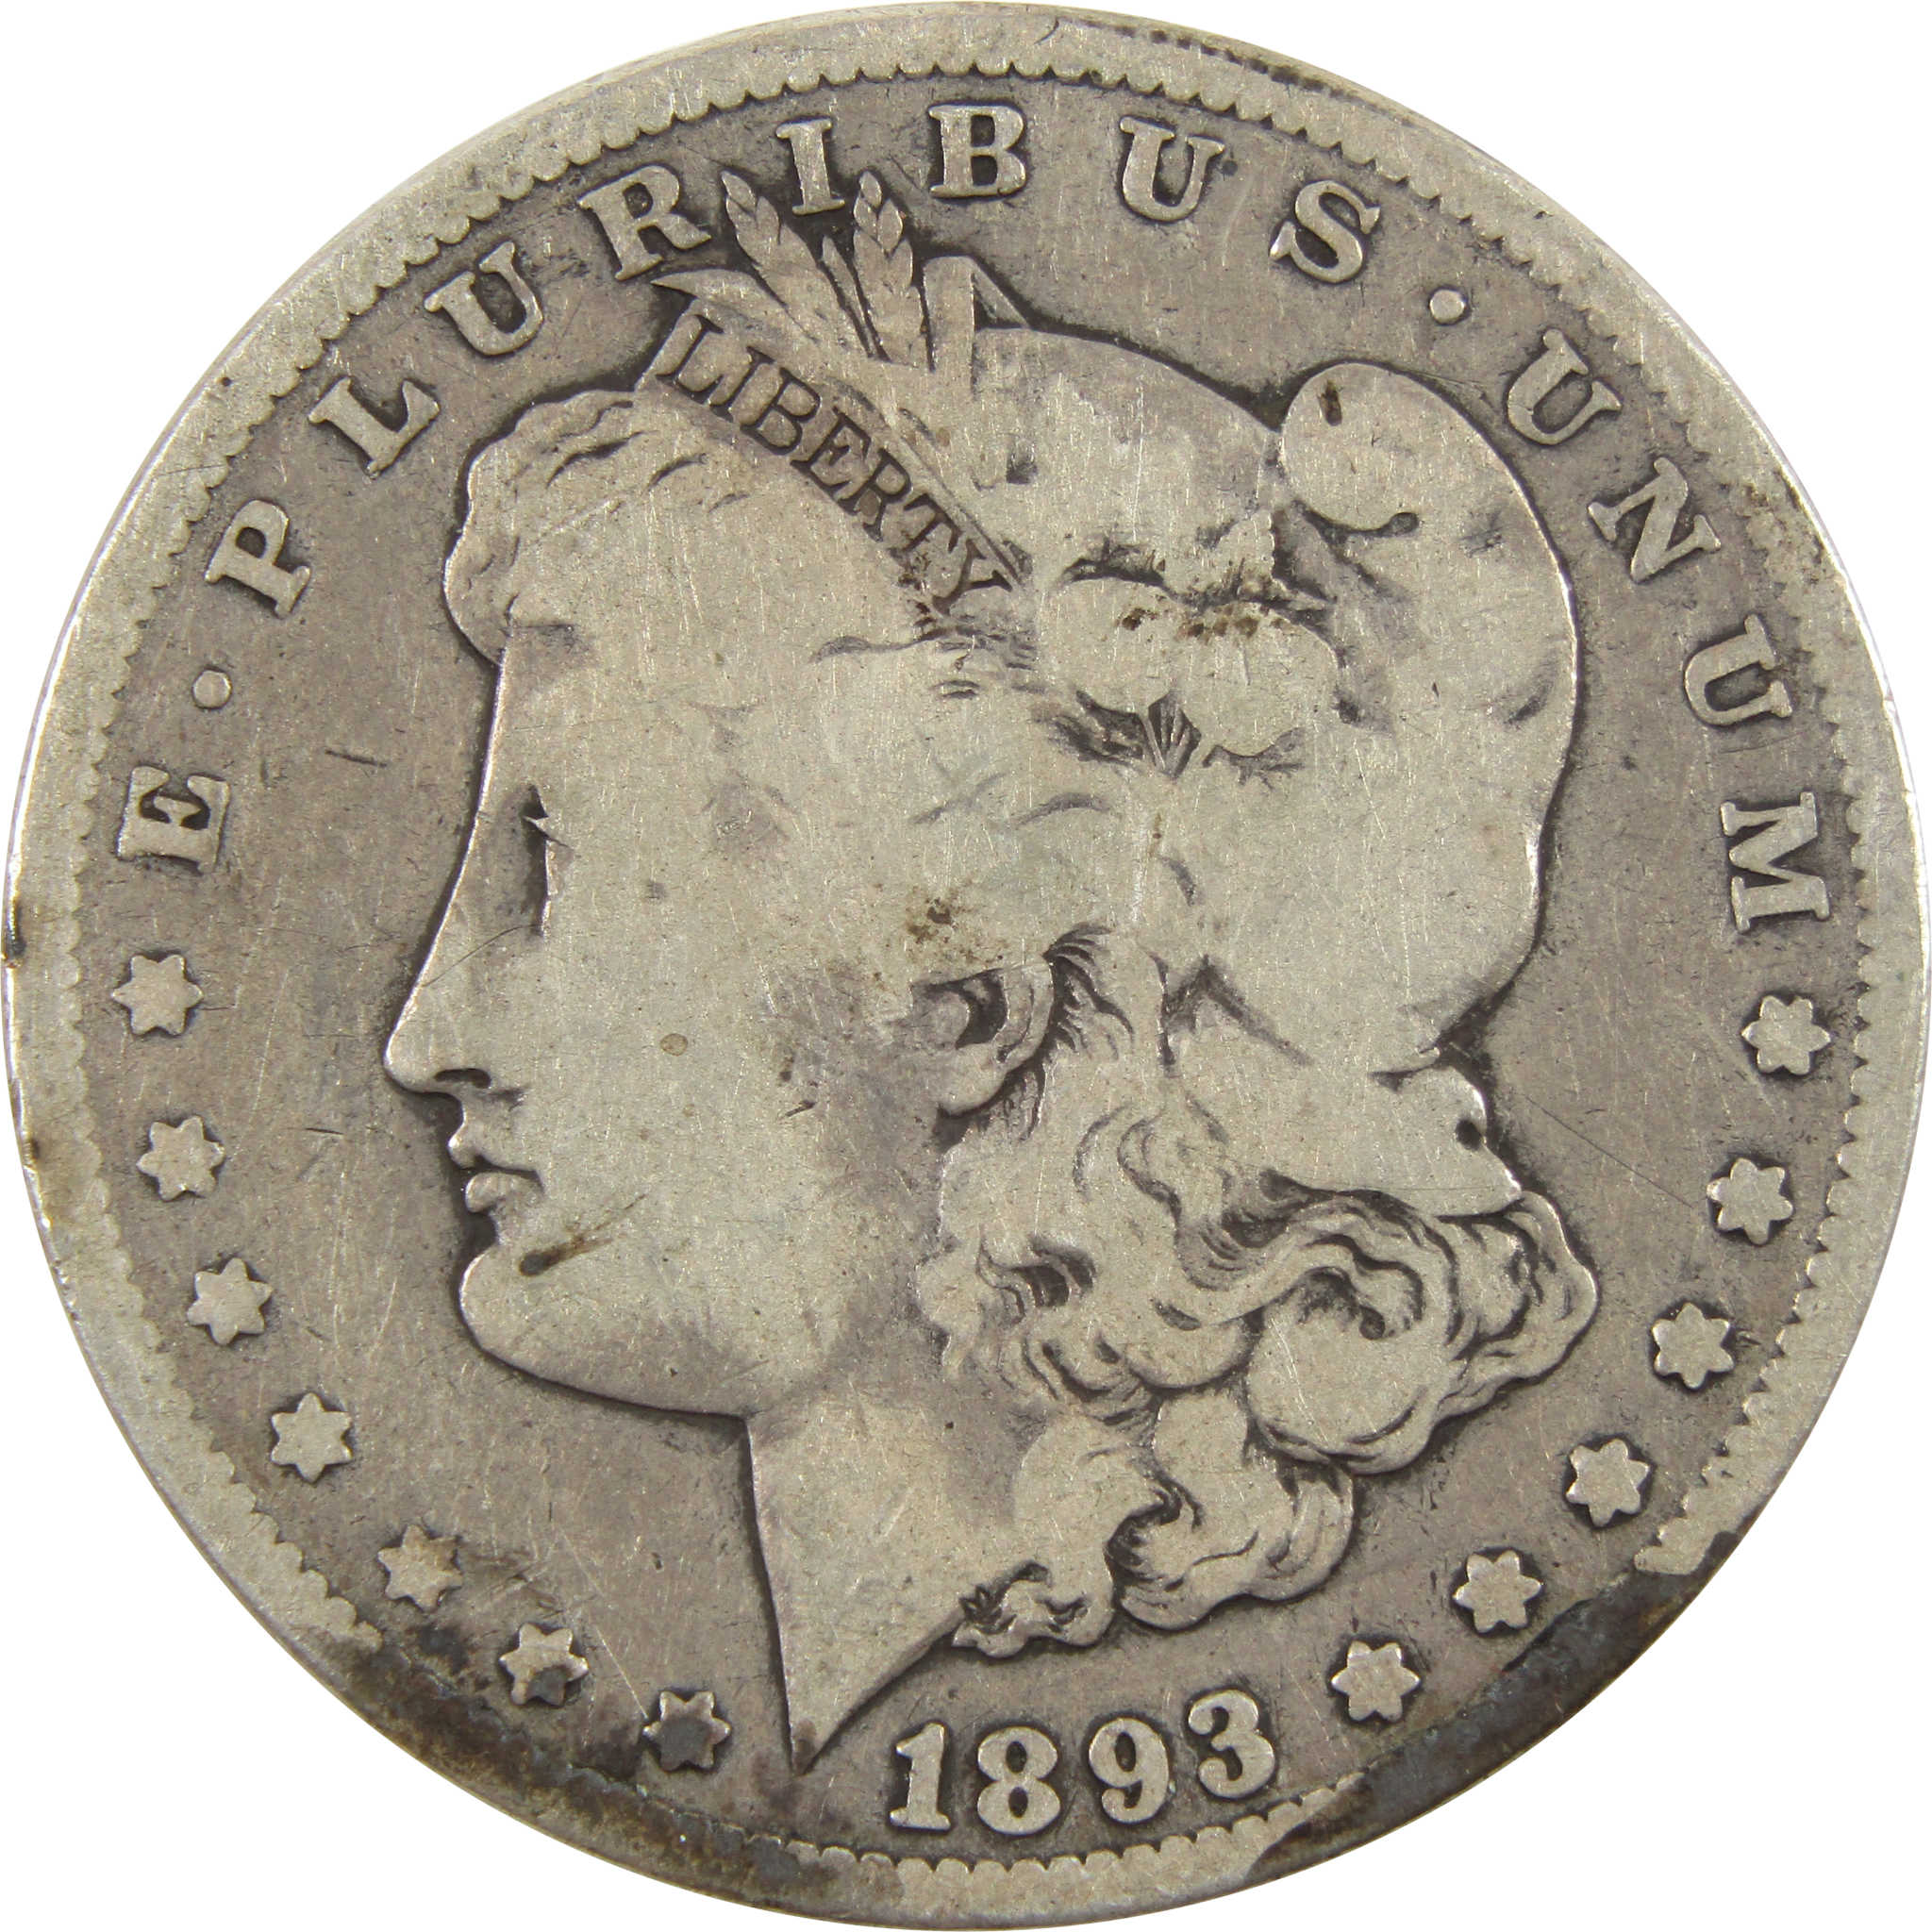 1893 CC Morgan Dollar VG Very Good Details 90% Silver $1 SKU:I11197 - Morgan coin - Morgan silver dollar - Morgan silver dollar for sale - Profile Coins &amp; Collectibles